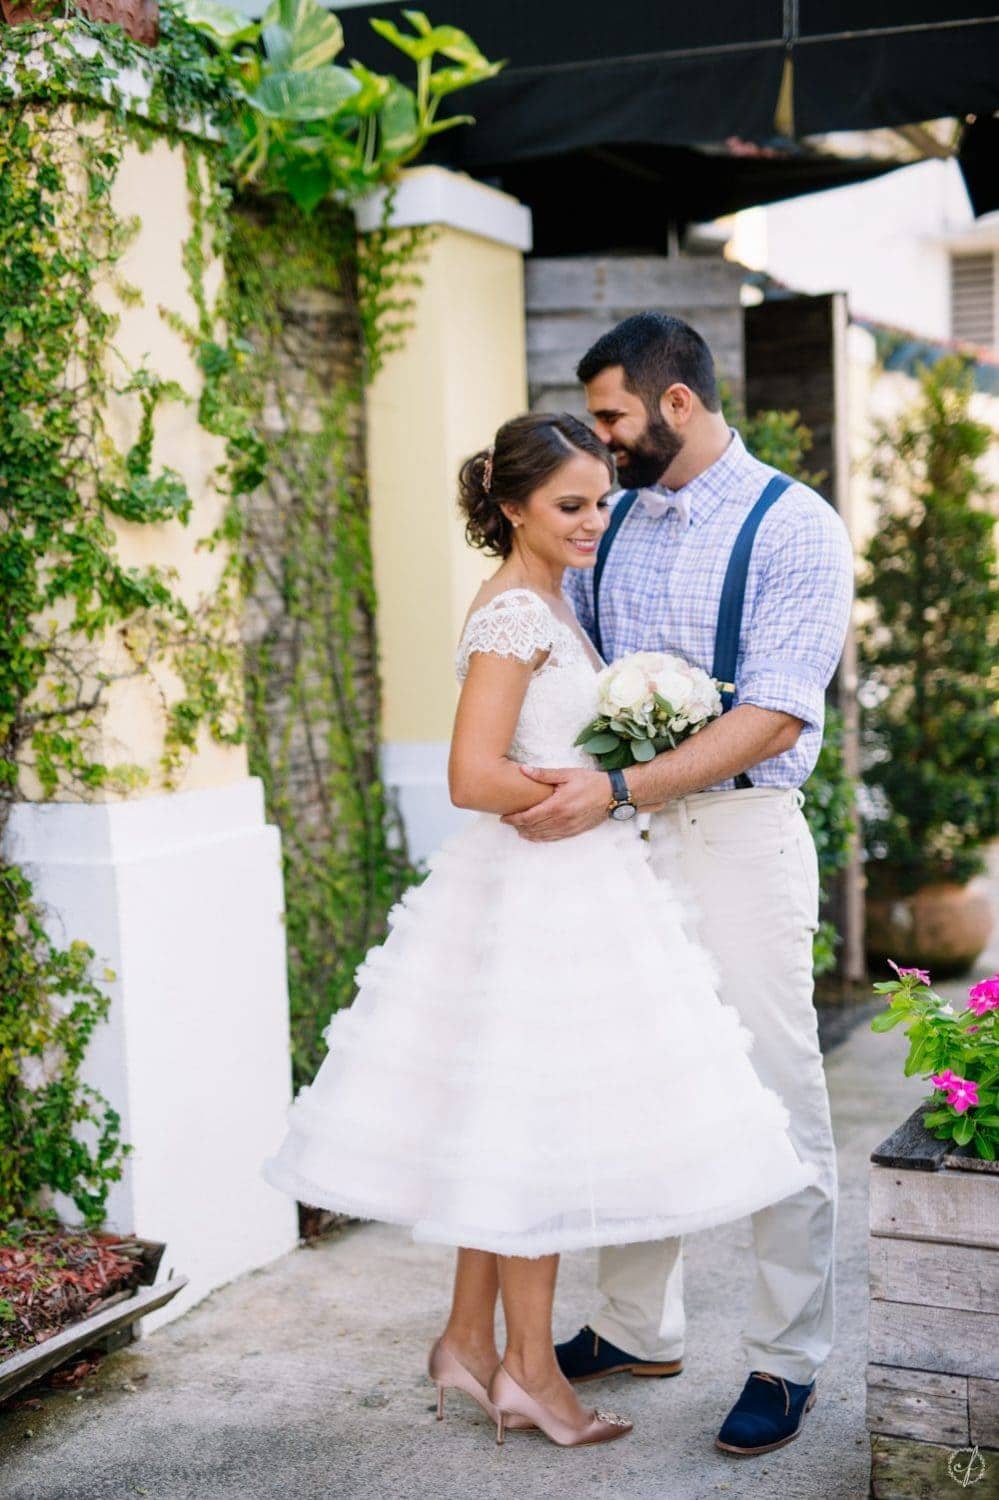 Intimate destination wedding photography at the rooftop of the Olive Boutique Hotel at Condado, Puerto Rico